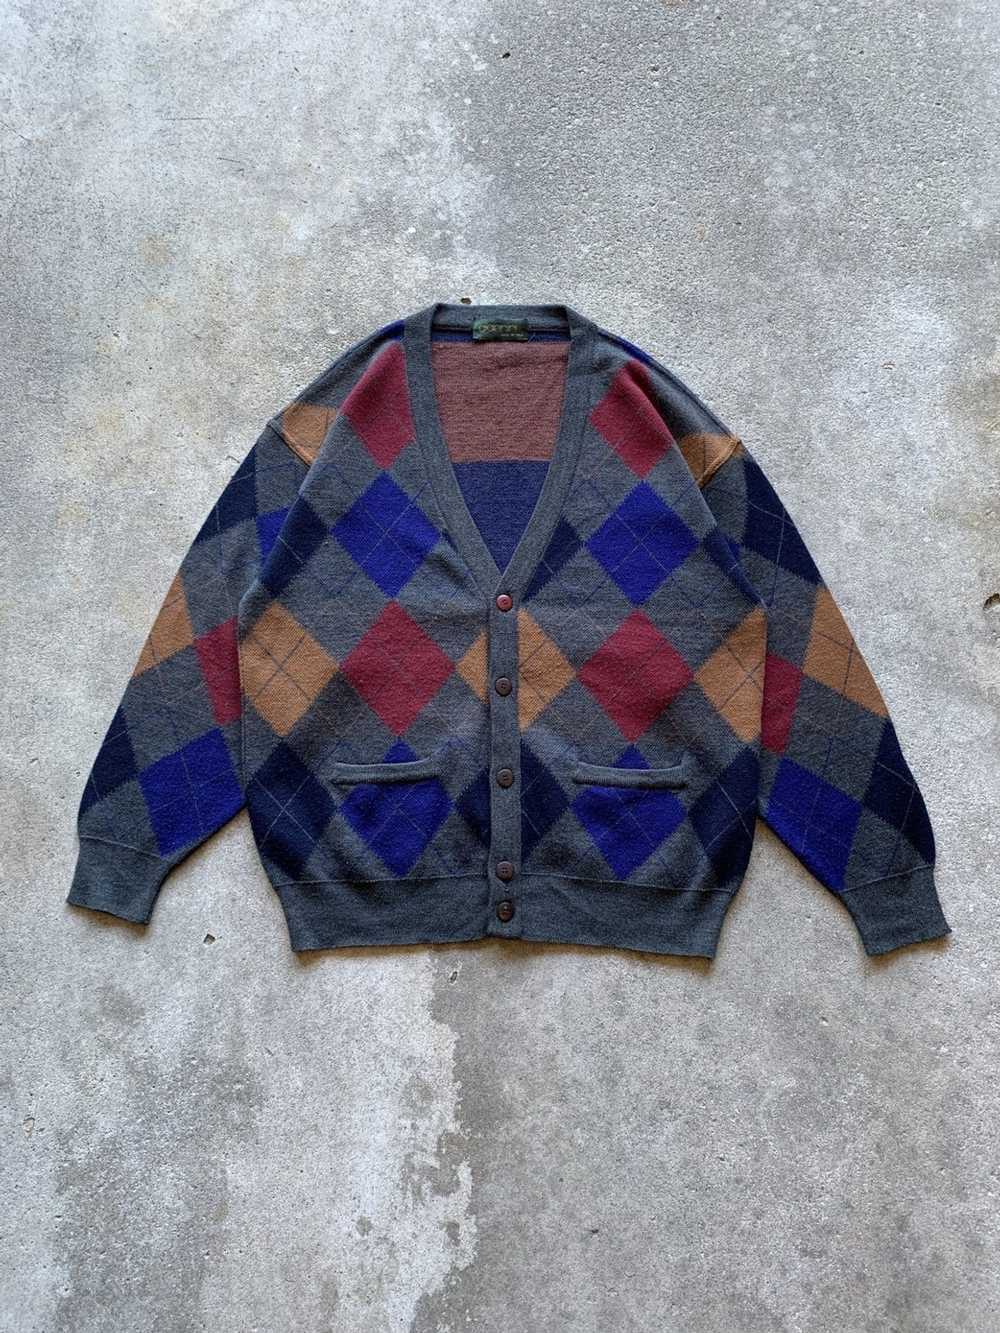 Coloured Cable Knit Sweater × Japanese Brand × Vi… - image 1